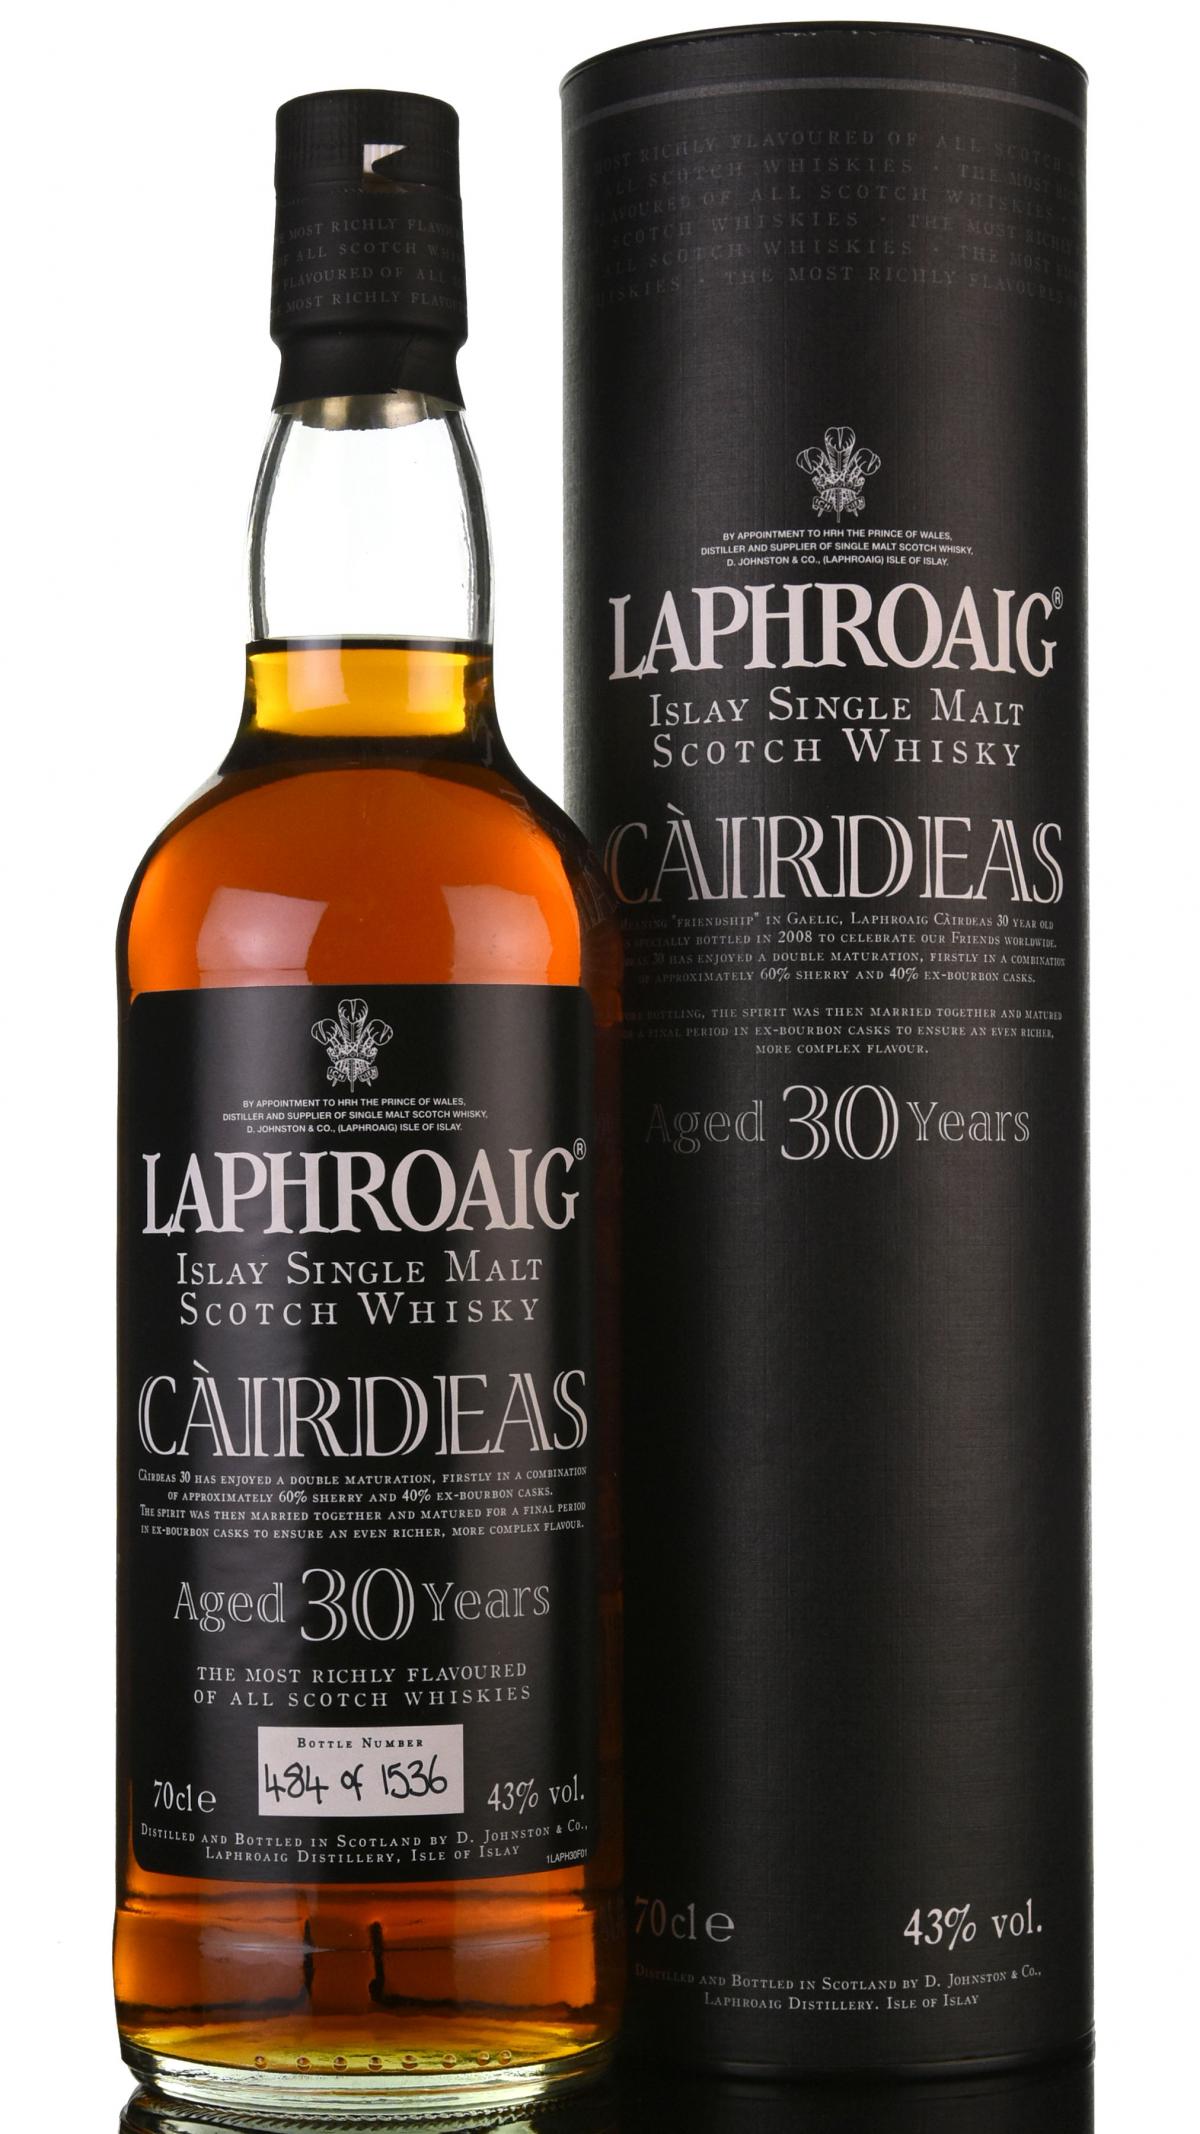 Laphroaig 30 Year Old - Cairdeas - 2008 Release